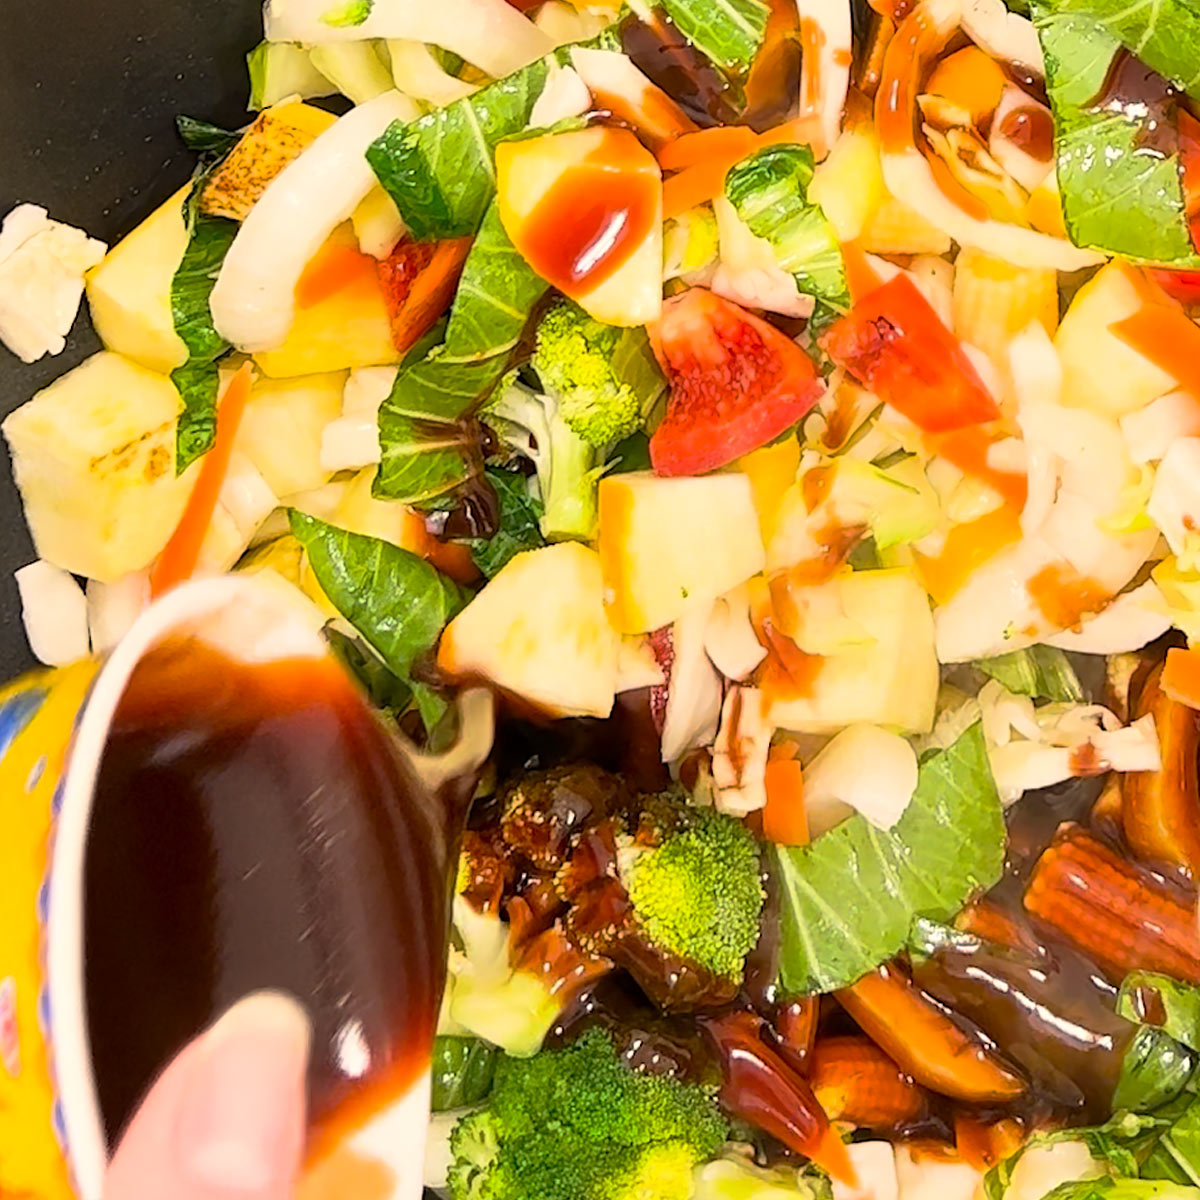 pour stir fry sauce over your food in the wok or pan